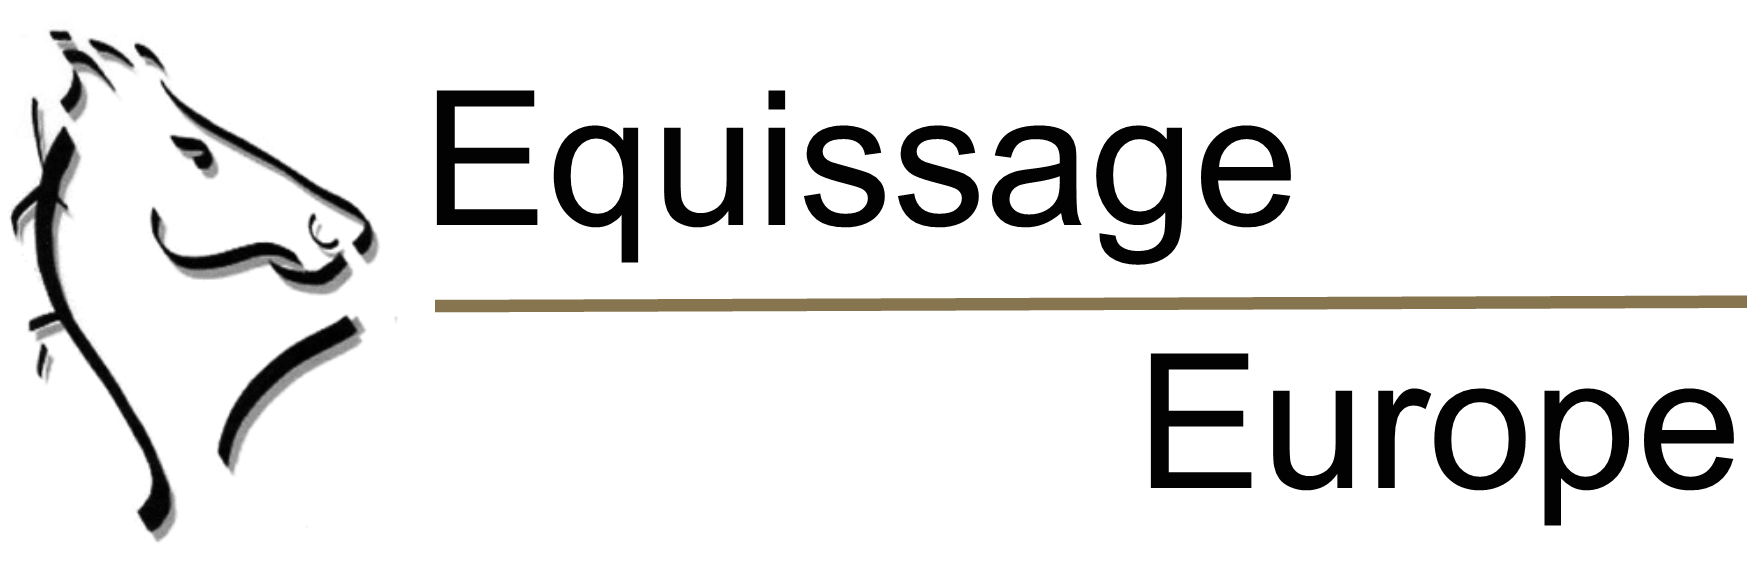 Equissage Europe